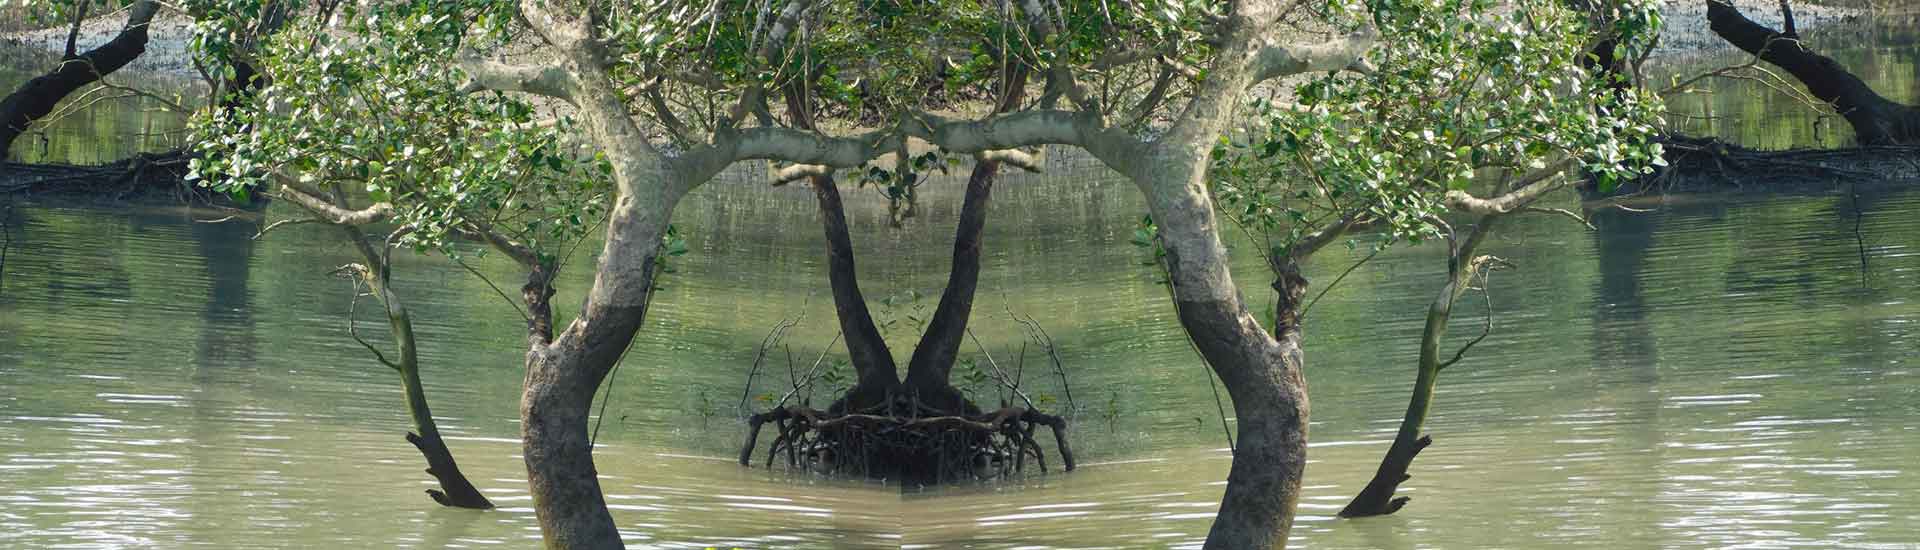 Why does Sundarban attract tourists?